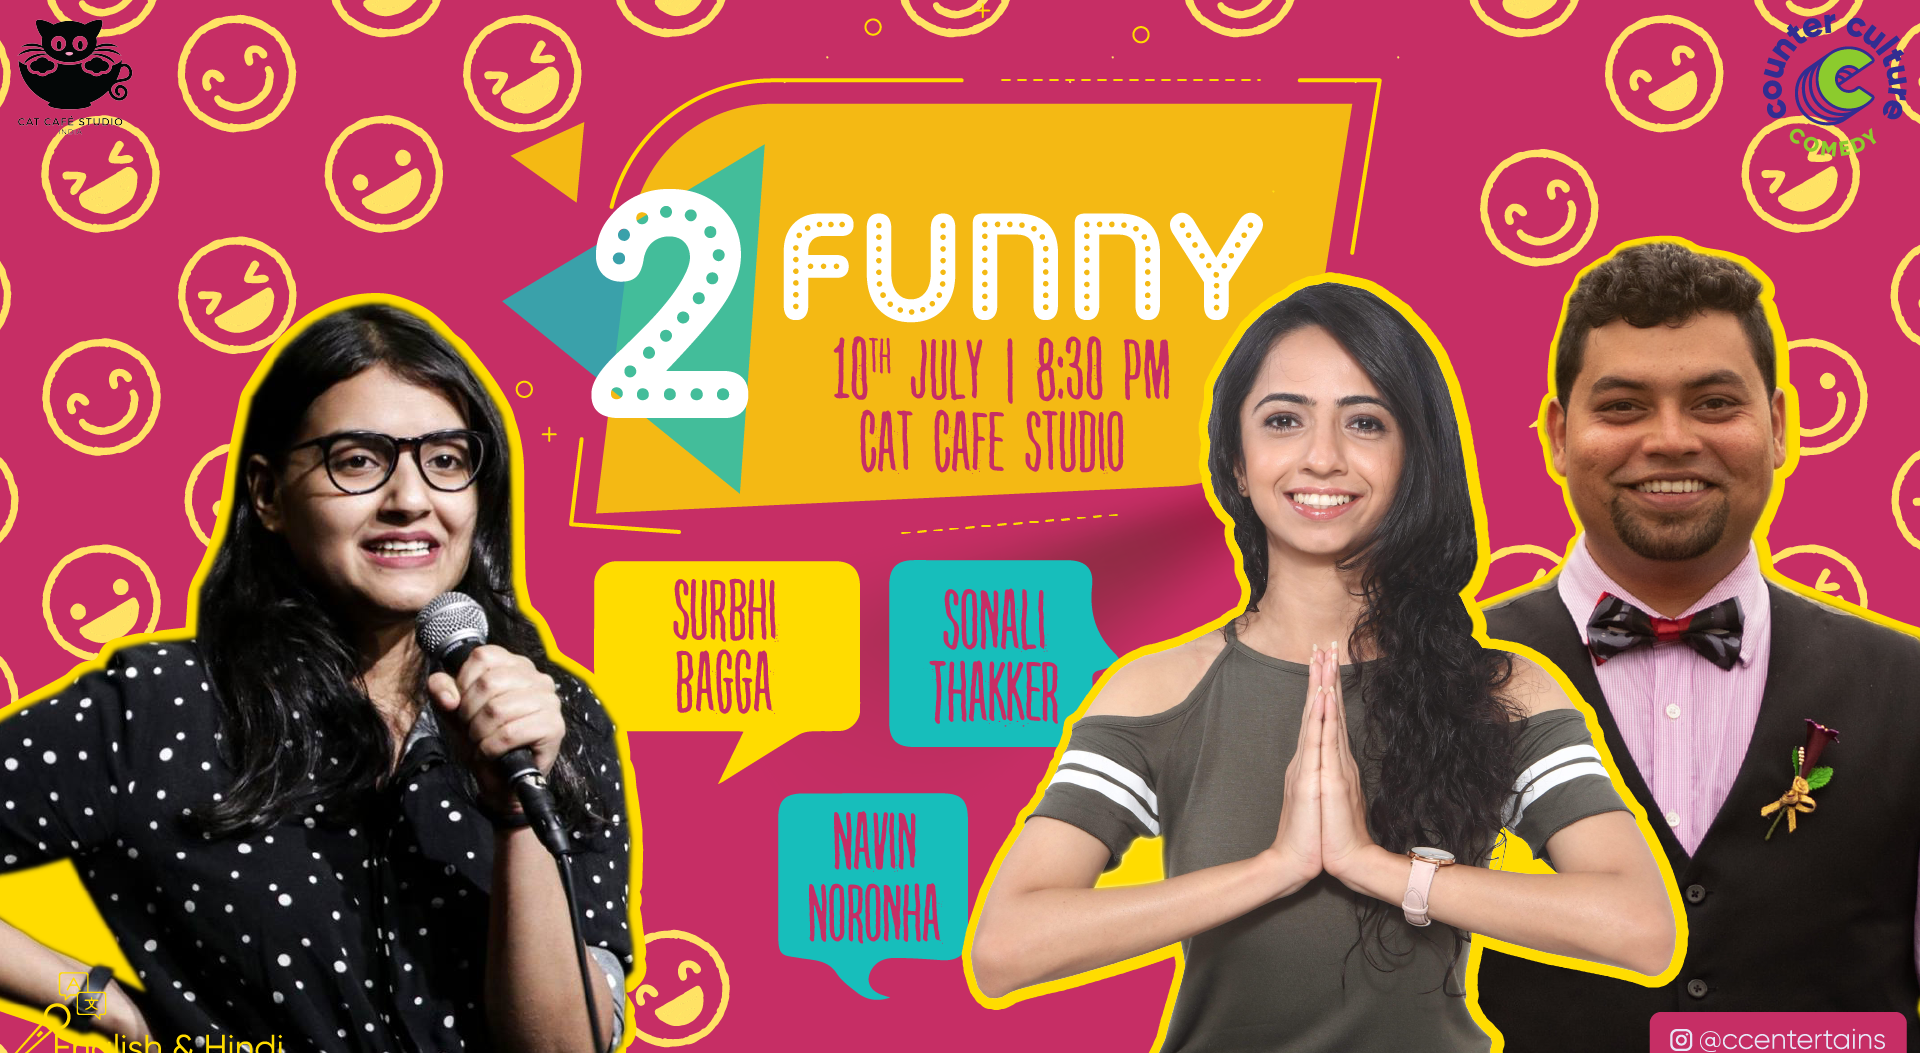 2 Funny - A Stand-Up Comedy Show